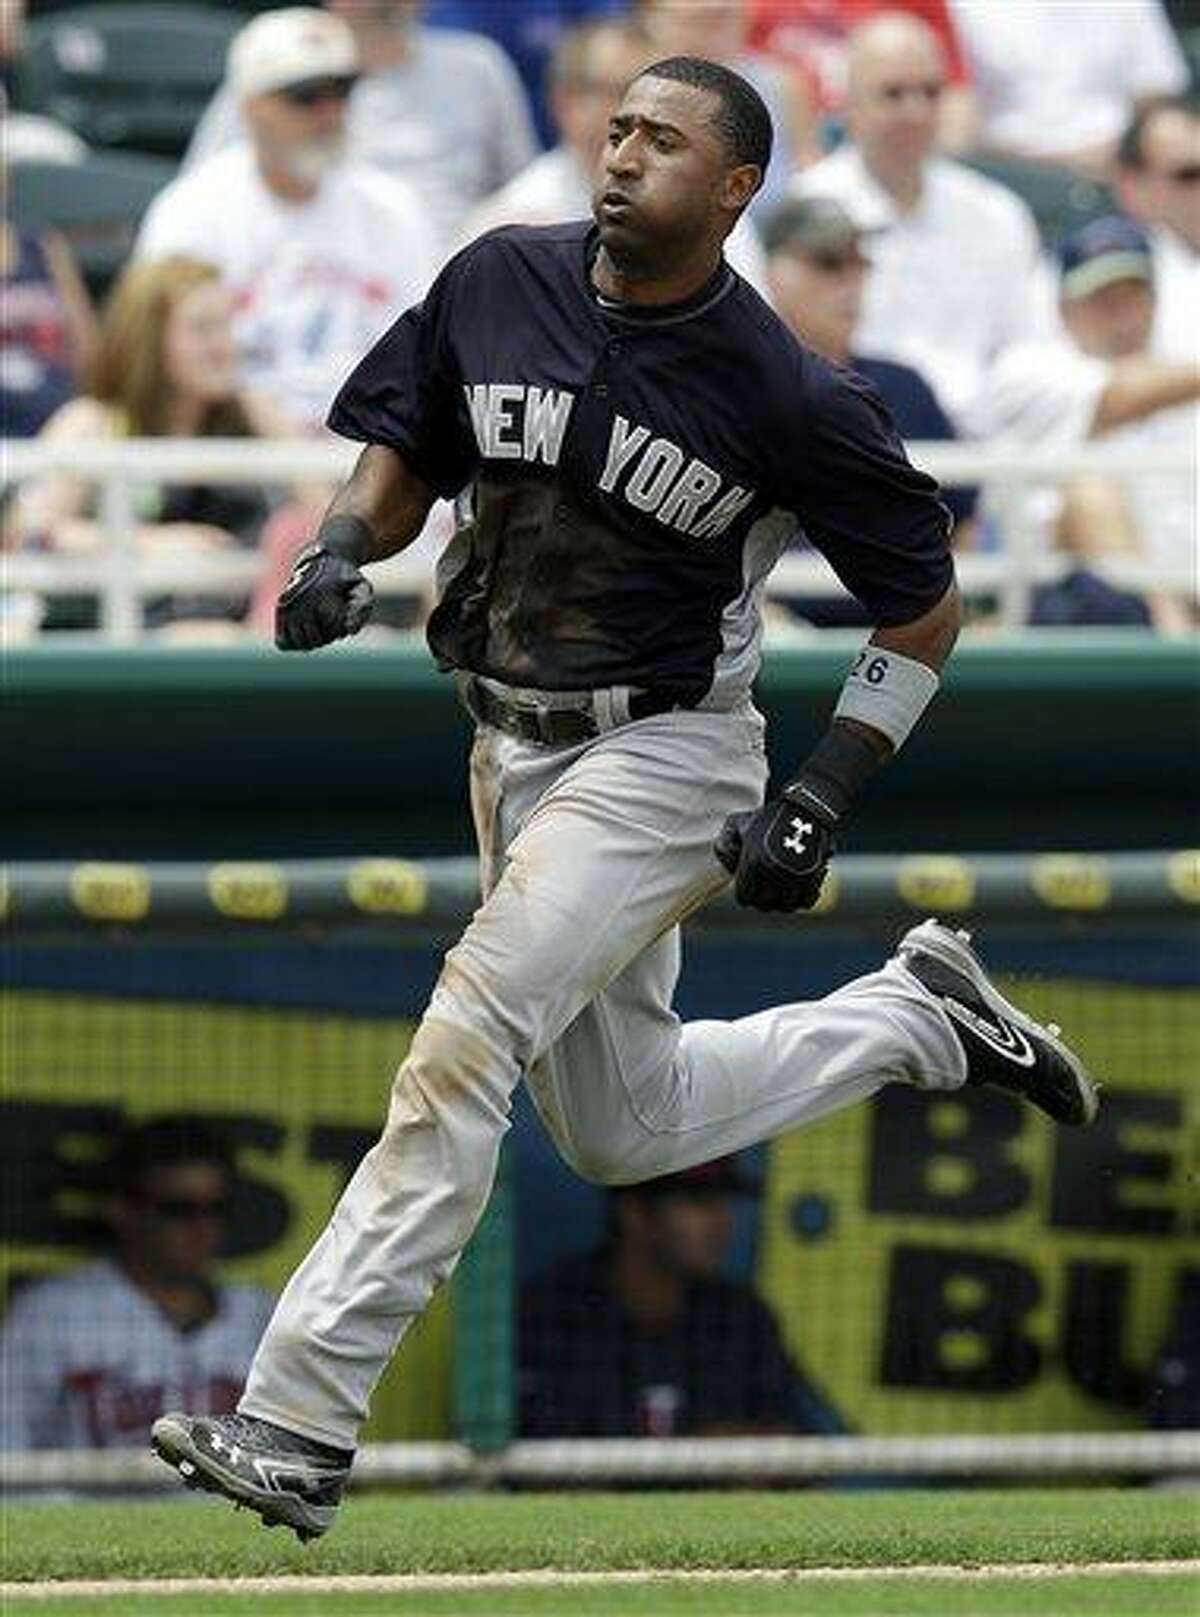 New York Yankees' Eduardo Nunez runs to home plate during an exhibition spring training baseball game against the Minnesota Twins in Fort Myers, Fla., Friday, March 22, 2013. (AP Photo/Elise Amendol12